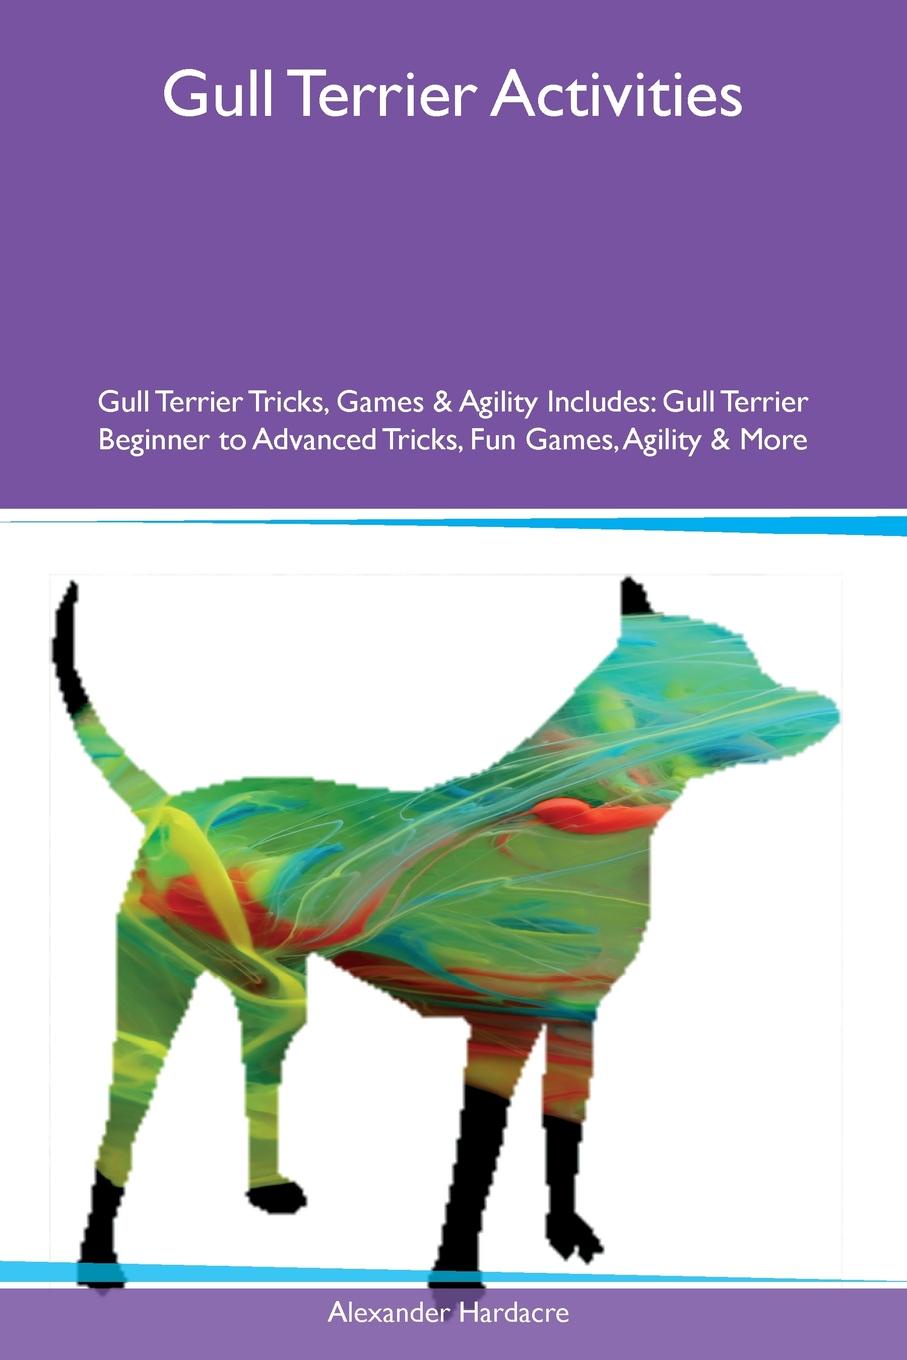 Gull Terrier Activities Gull Terrier Tricks, Games & Agility Includes. Gull Terrier Beginner to Advanced Tricks, Fun Games, Agility & More